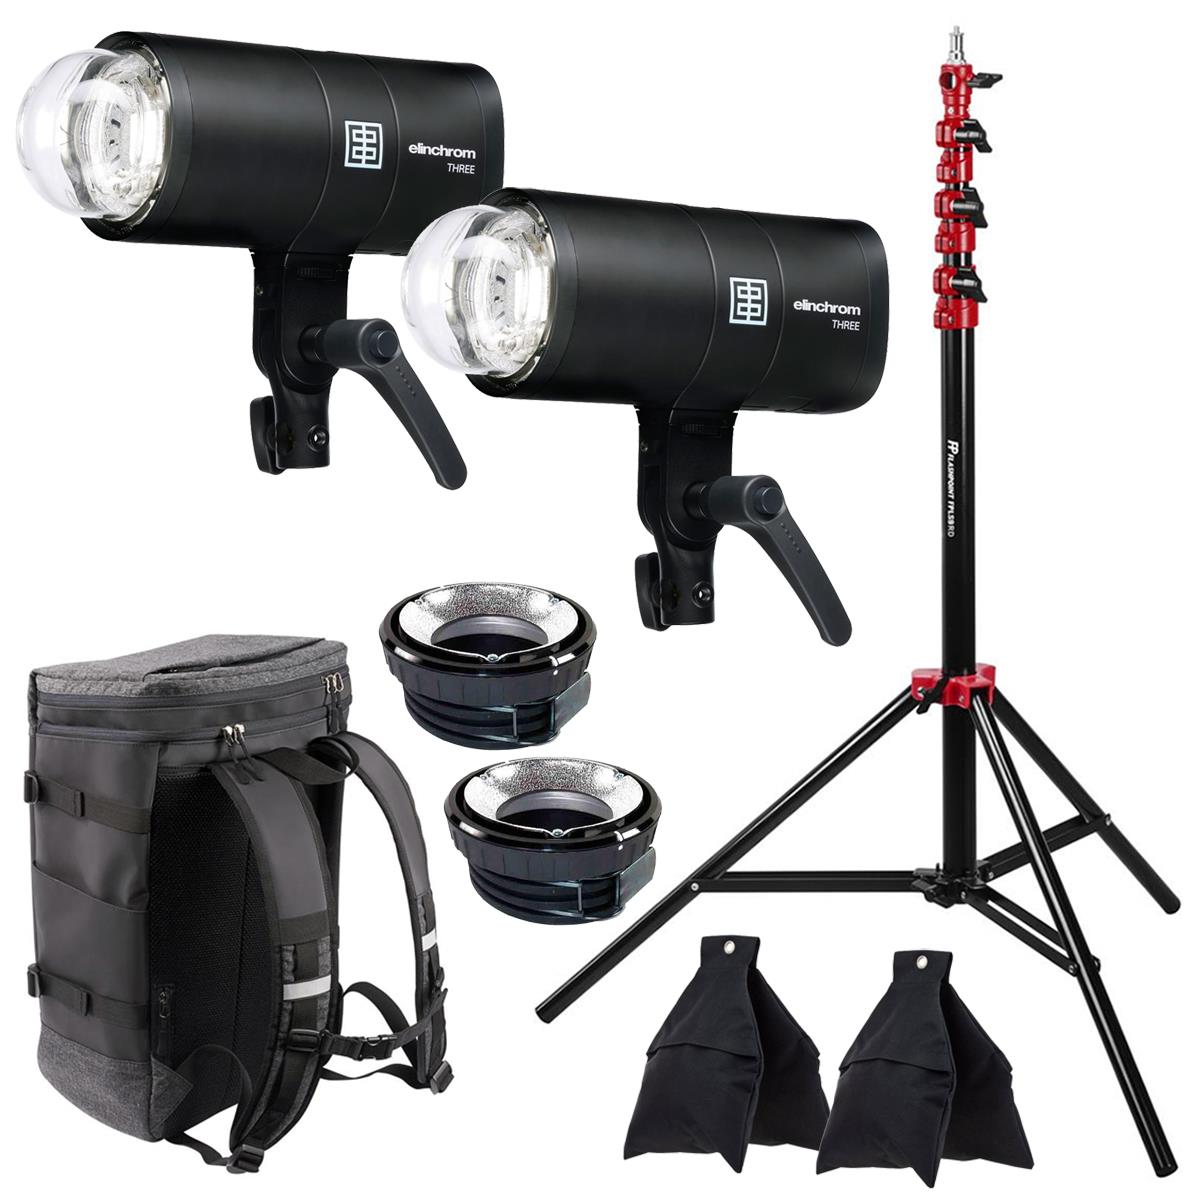 Image of Elinchrom THREE 261Ws Off-Camera Dual Flash Kit with 9.5' Stand and 2x Sand Bag